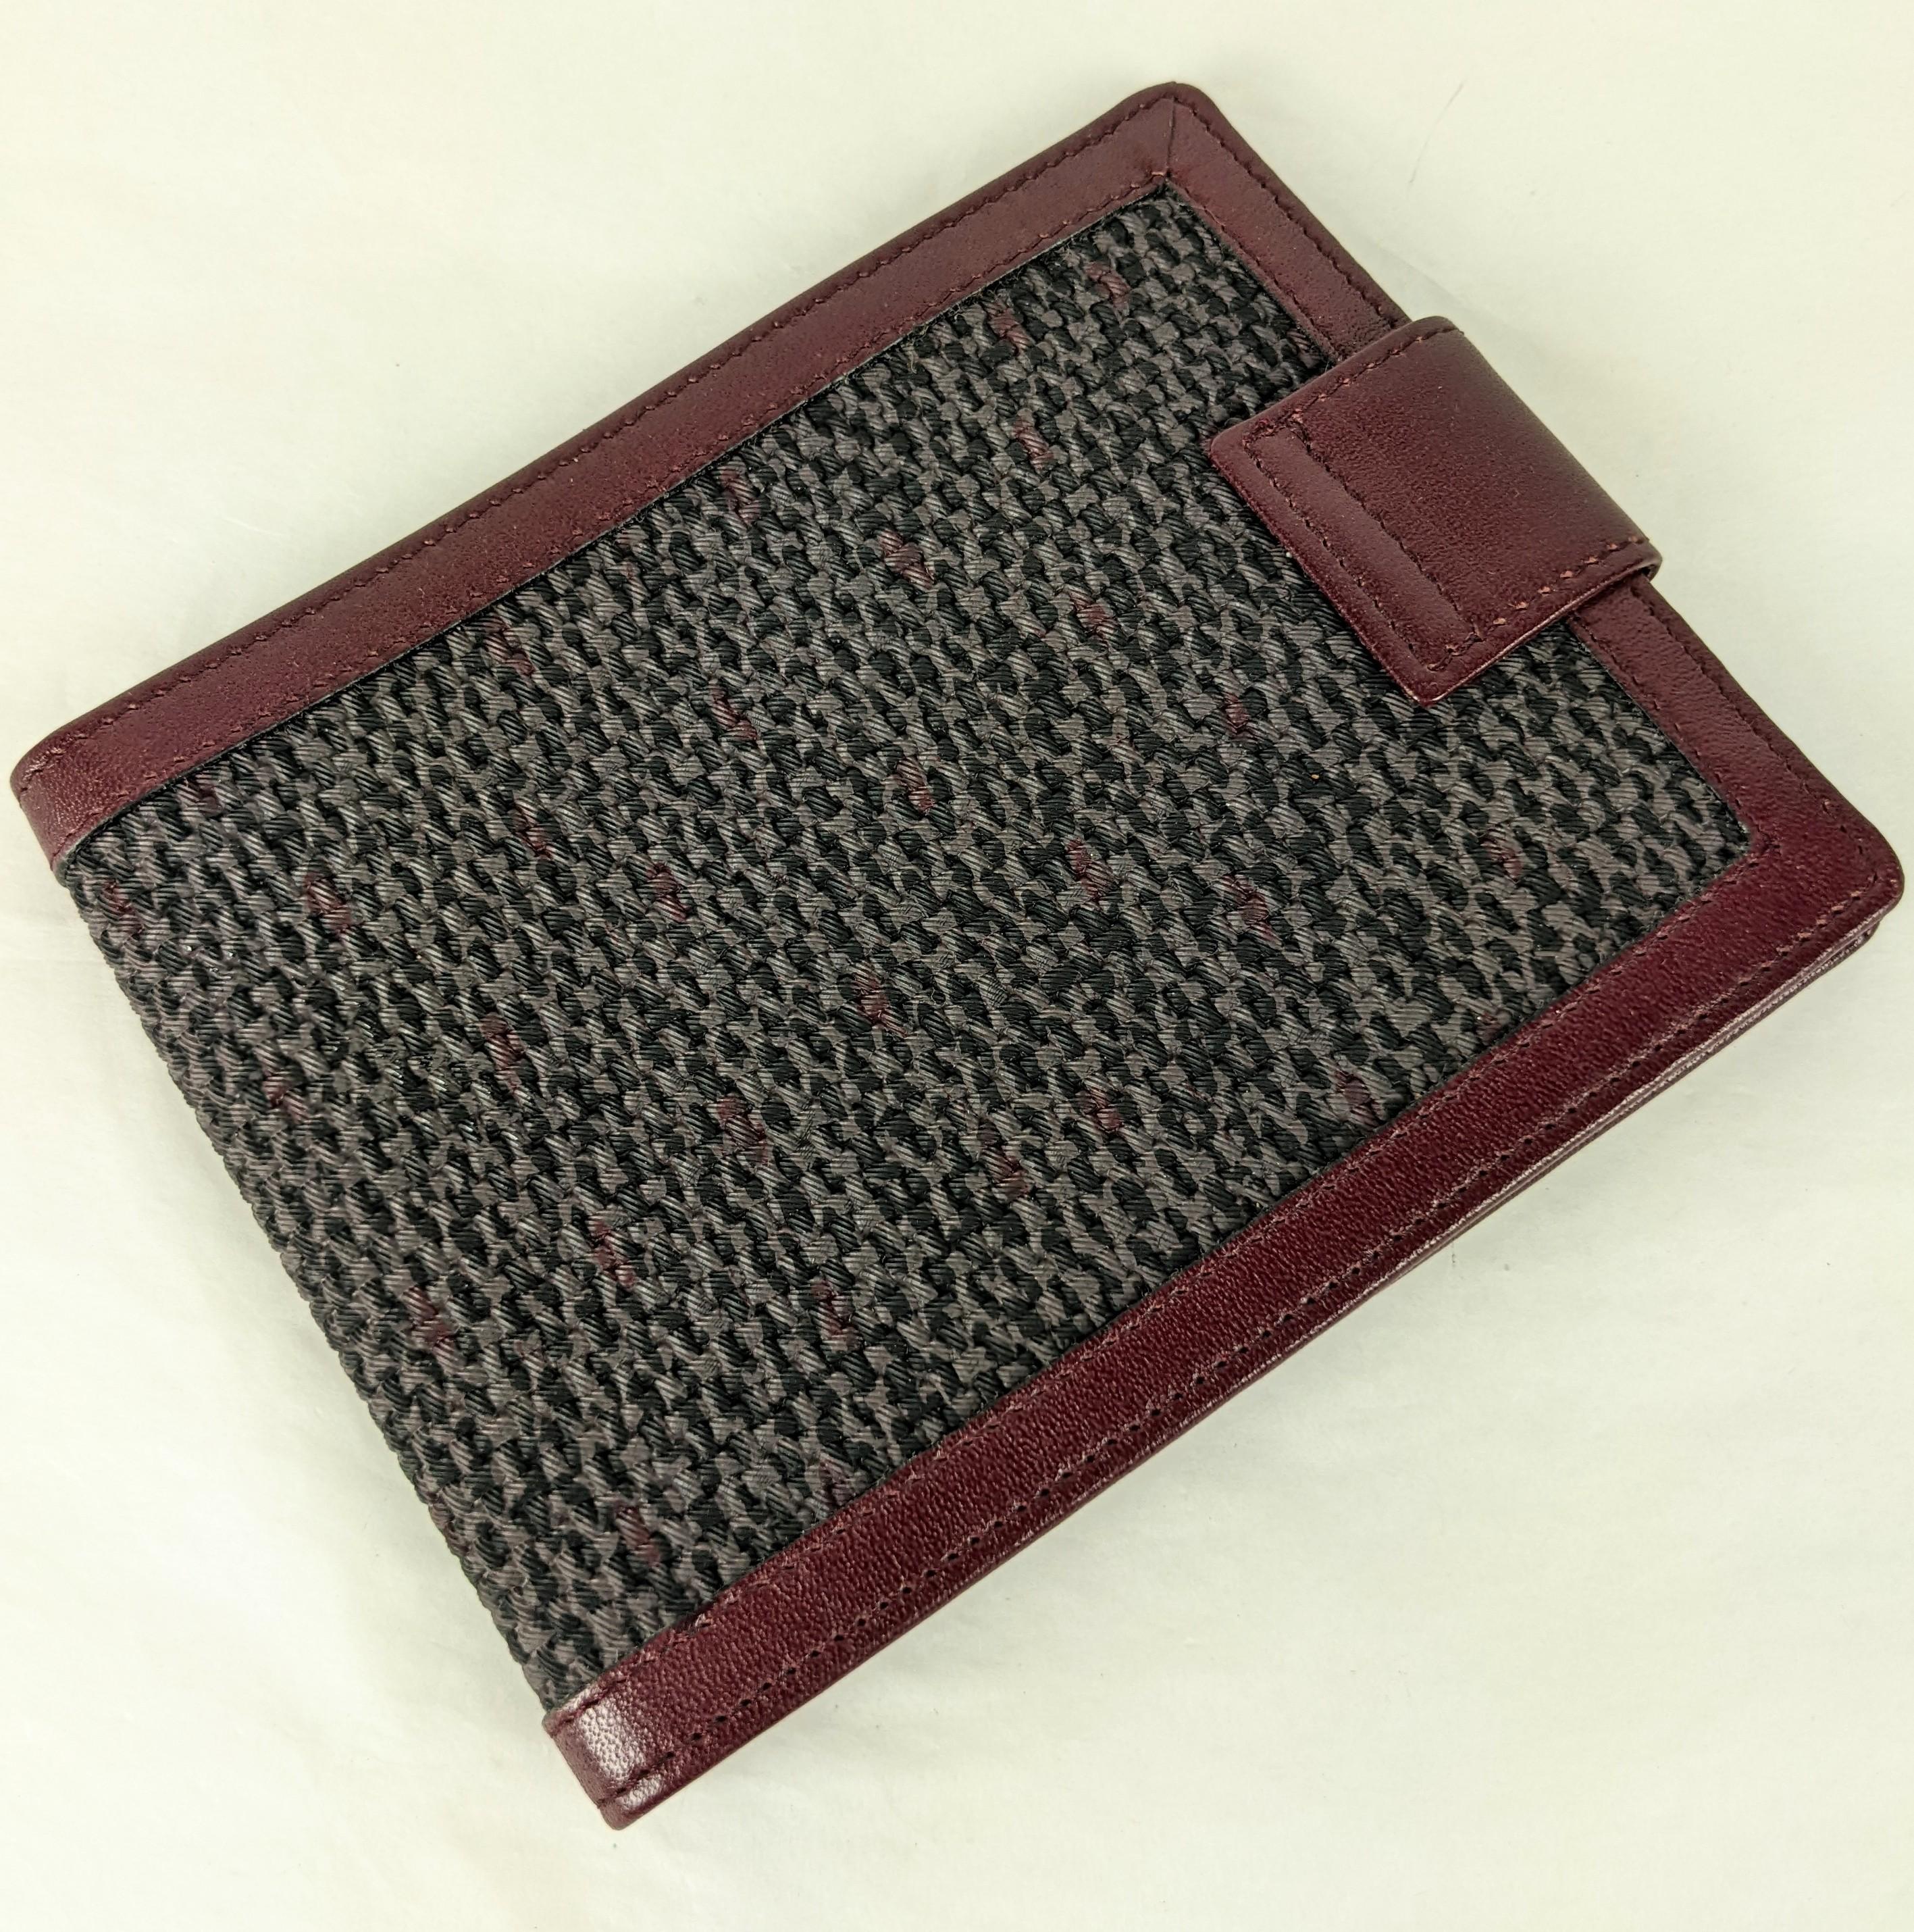 Yves Saint Laurent Faux Tweed Leather Fold In Excellent Condition For Sale In New York, NY